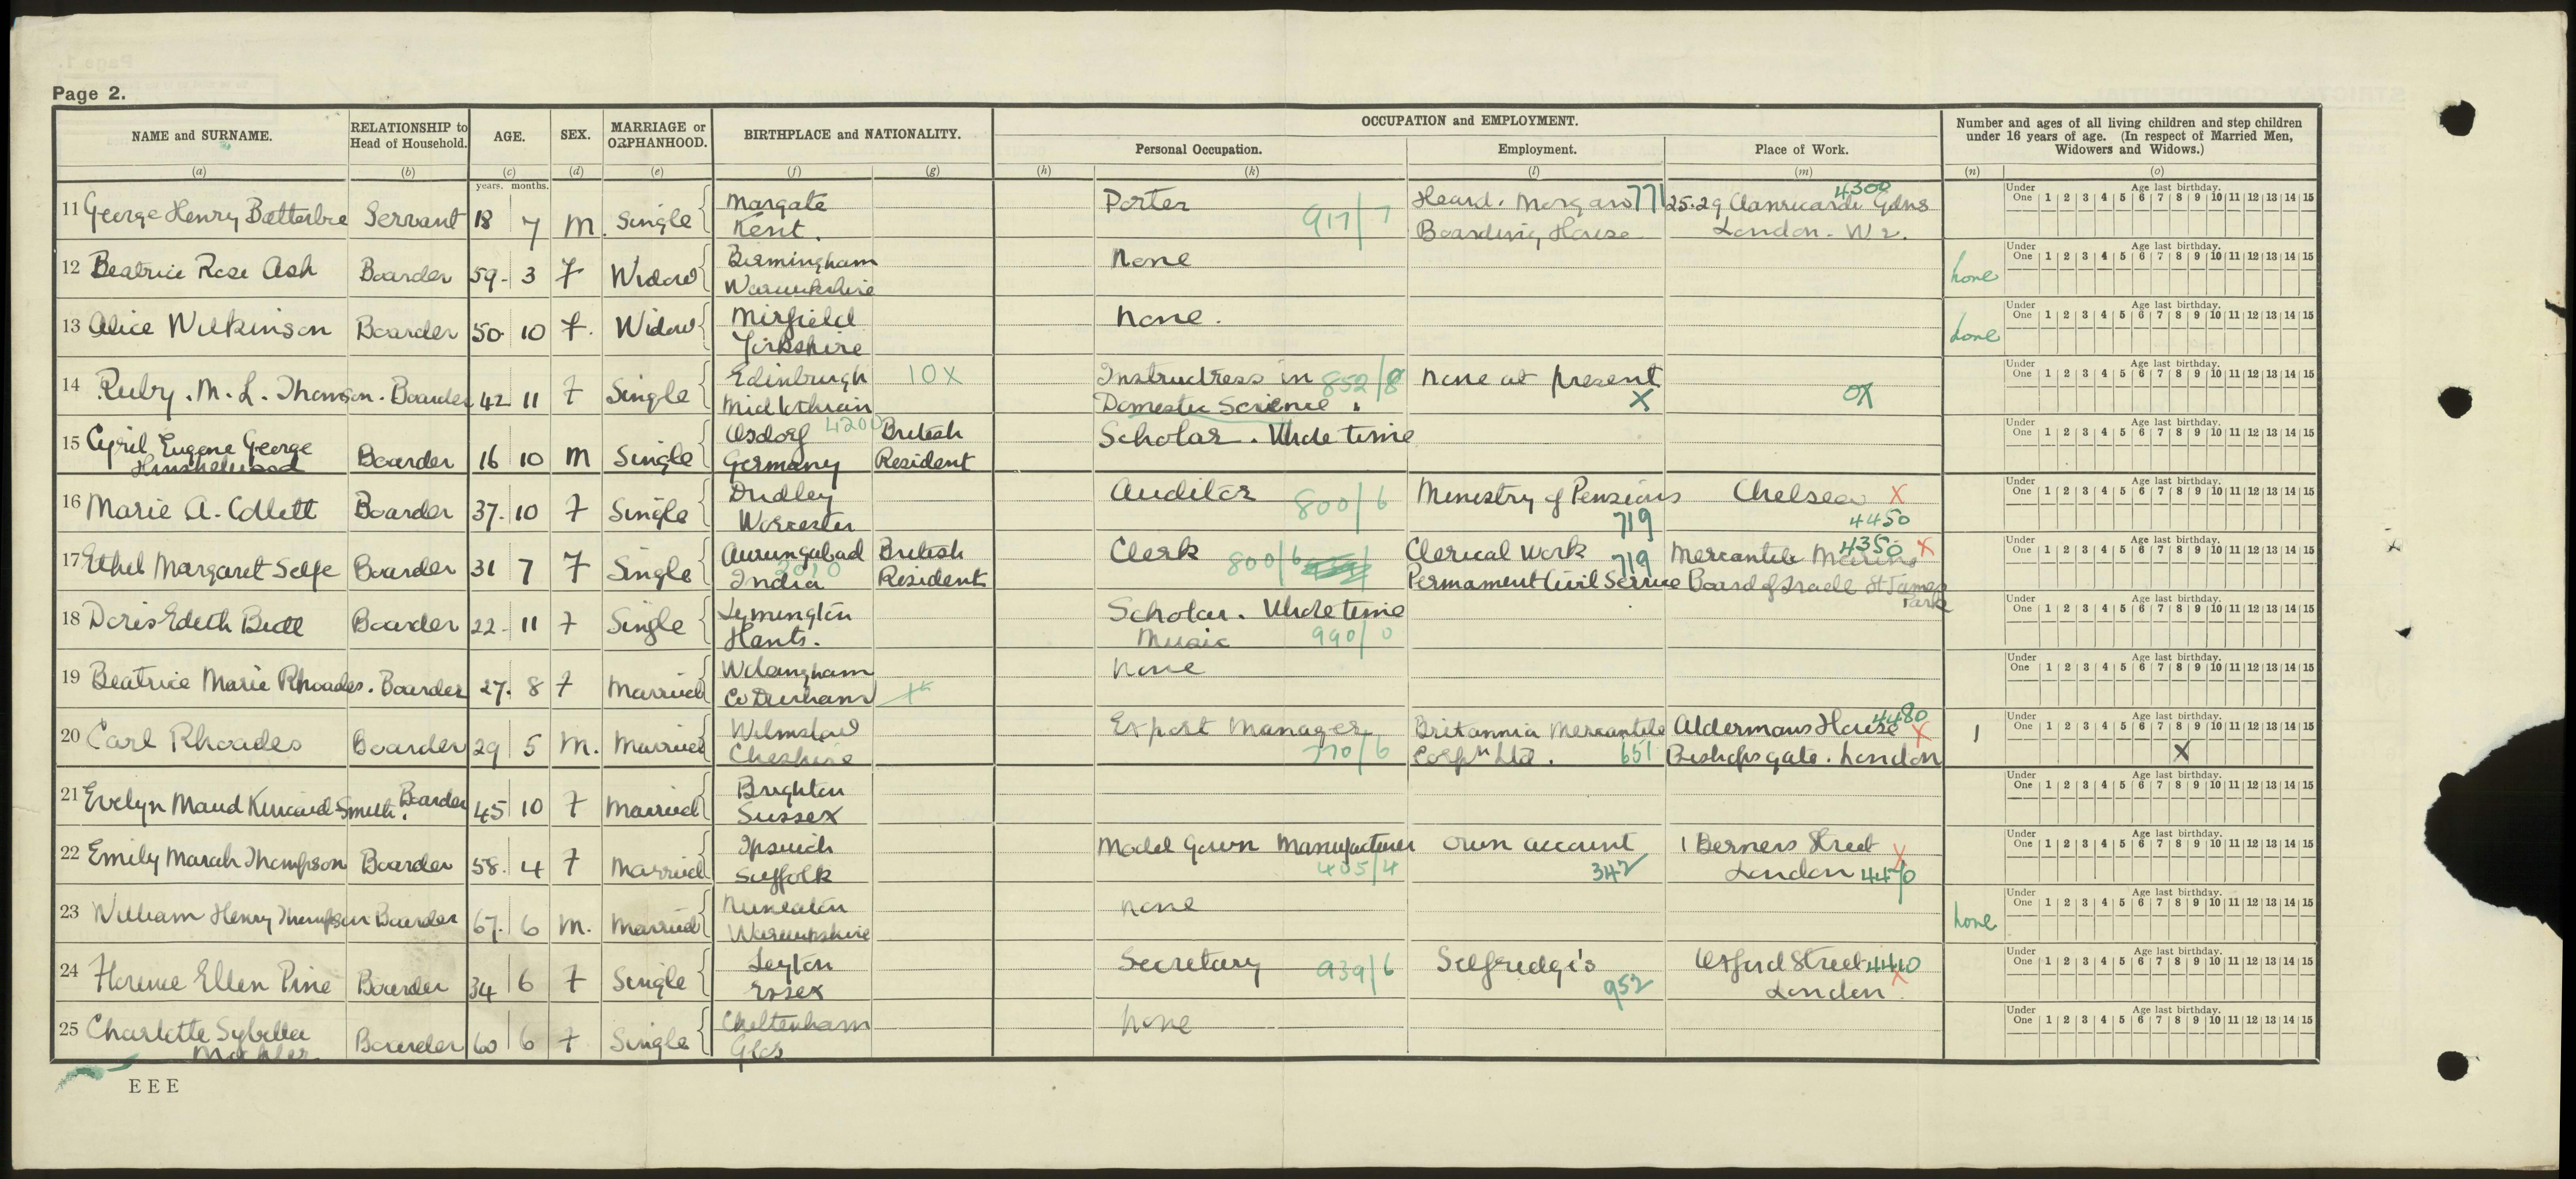 A 1921 Census record that lists Selfridges as a citizen's employer.